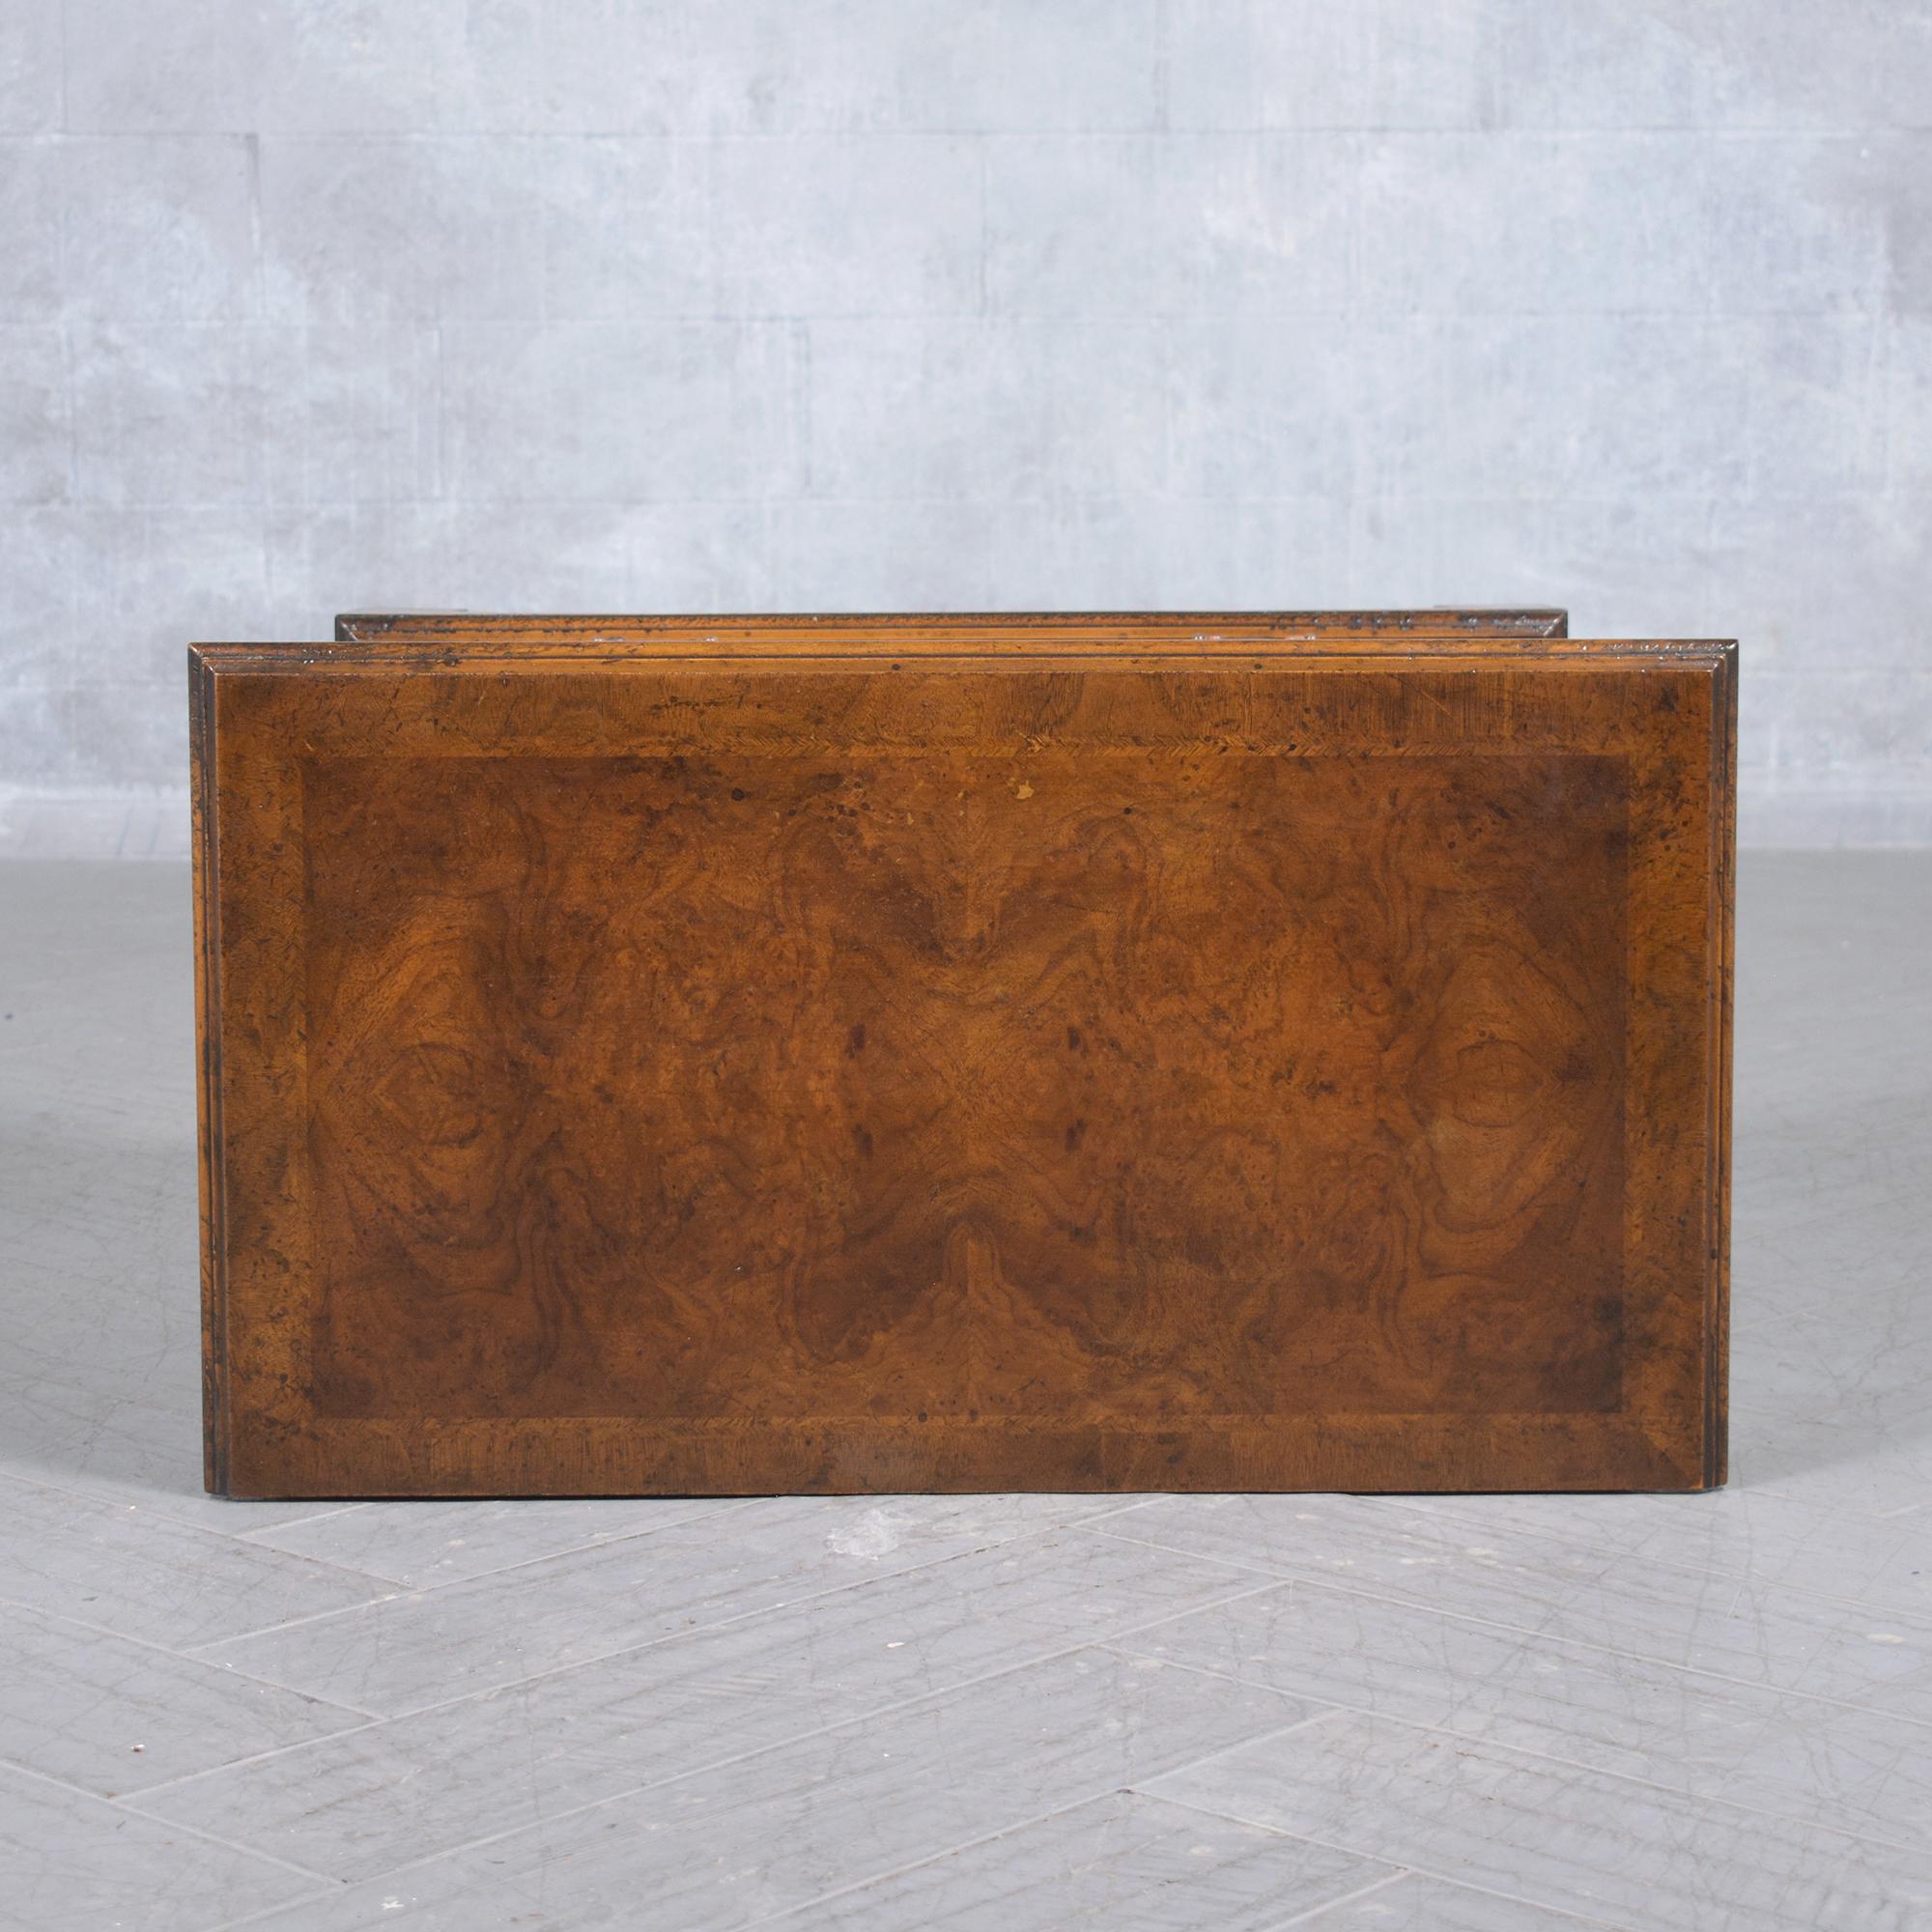 Restored Early 1950s Burled Veneers Chest of Drawers: A Vintage Patina Finish In Good Condition For Sale In Los Angeles, CA